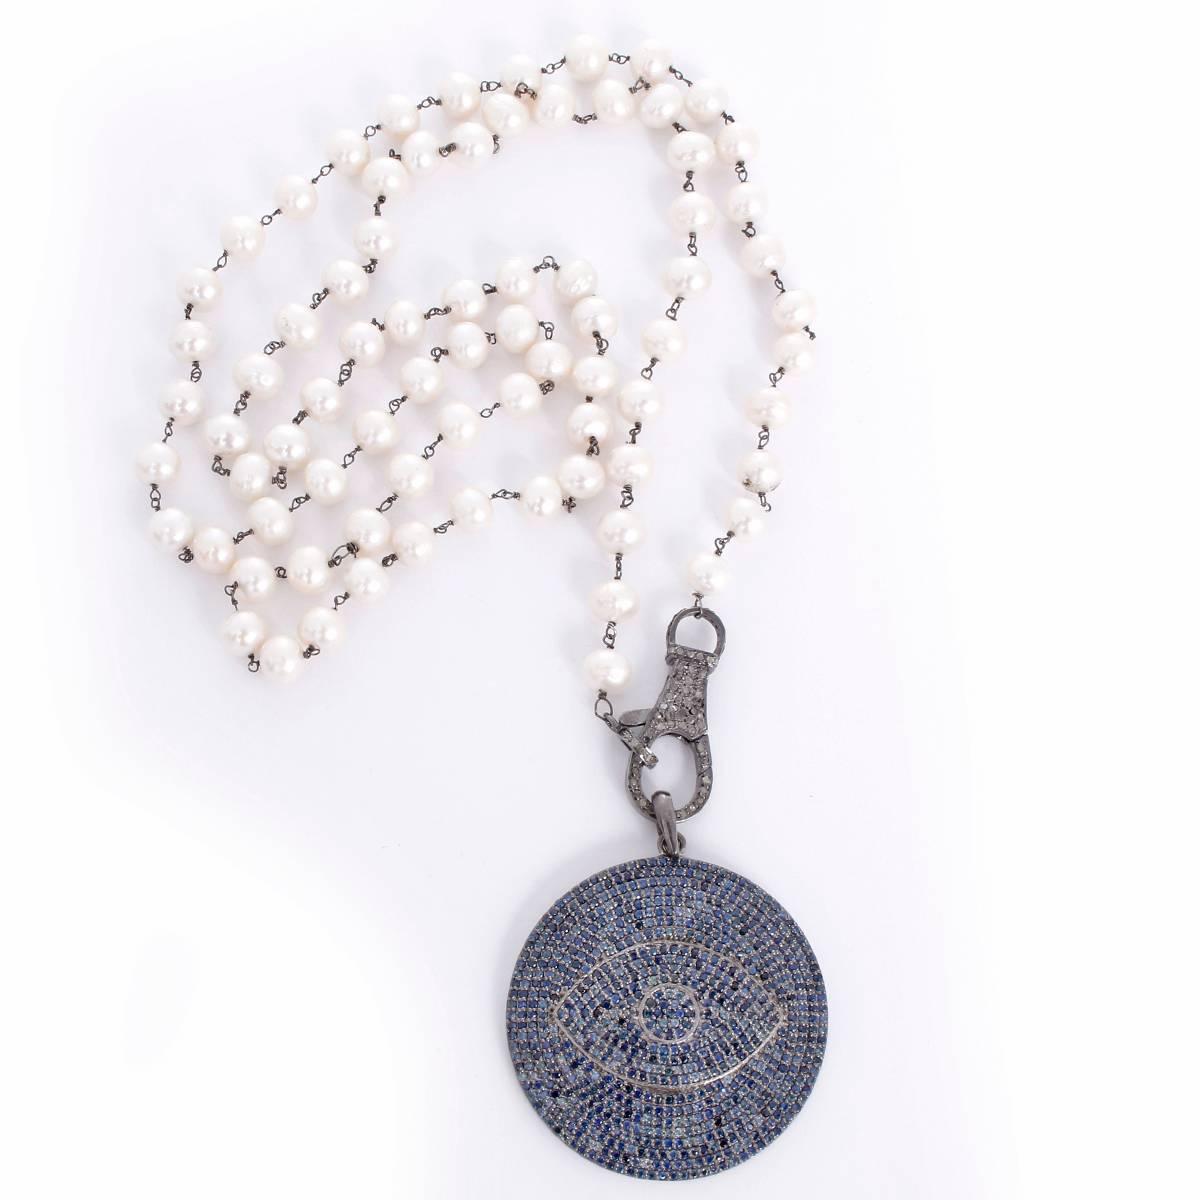 This stunning necklace features an evil eye disc pendant in blue sapphires  with a diamond clasp set in oxidized silver on a freshwater pearl chain. Pendant measures apx. 1-7/8 inches in diameter on a 36-inch chain. Total weight is 79.3 grams.